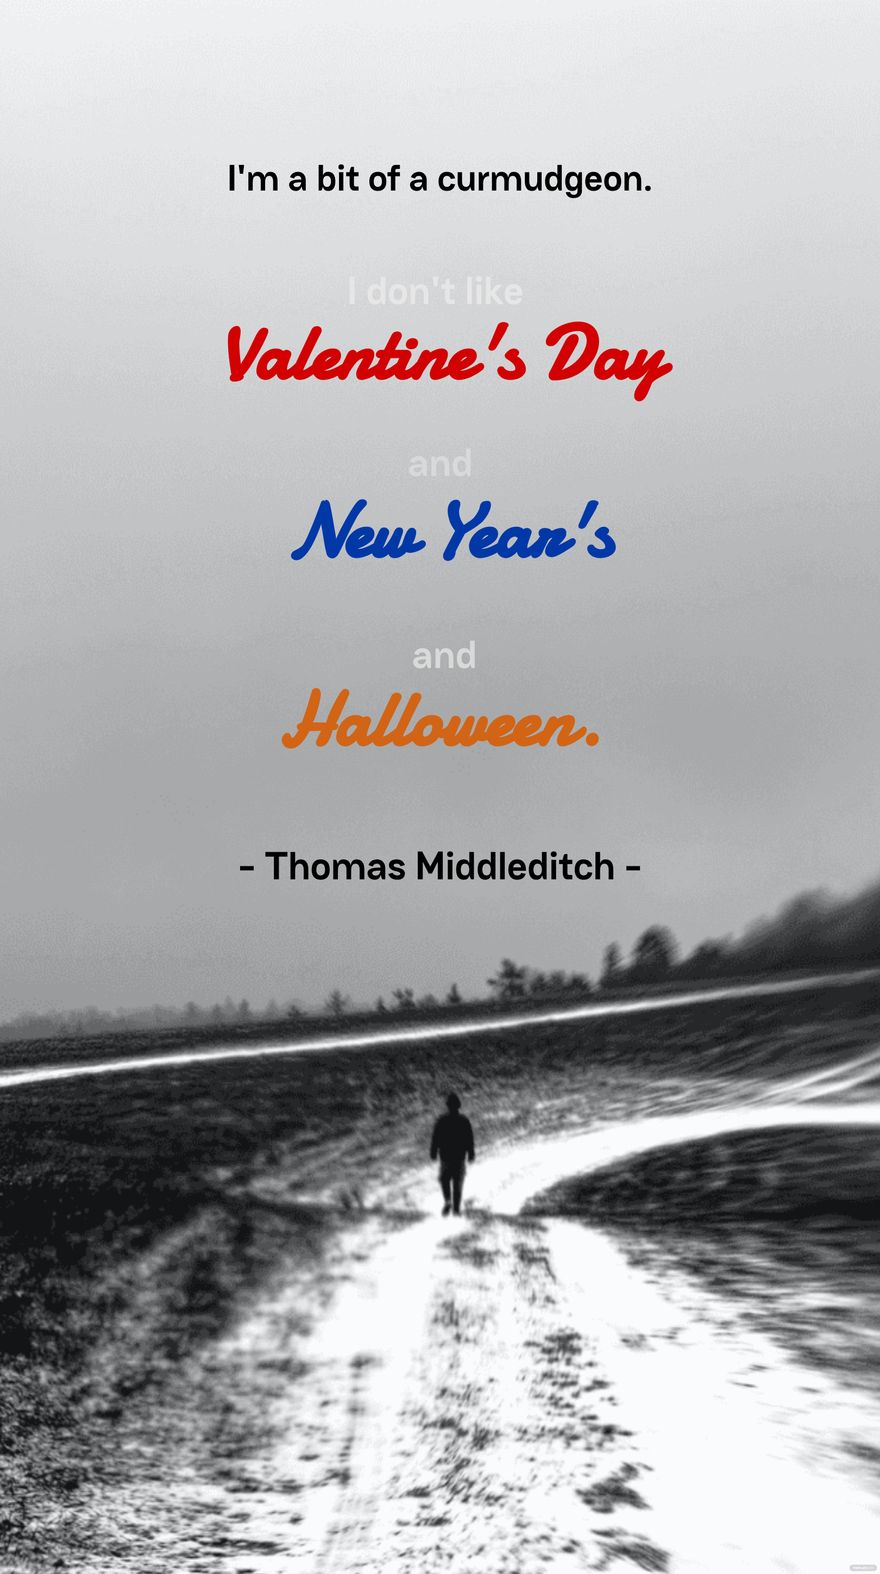 Free Thomas Middleditch - I'm a bit of a curmudgeon. I don't like Valentine's Day and New Year's and Halloween.